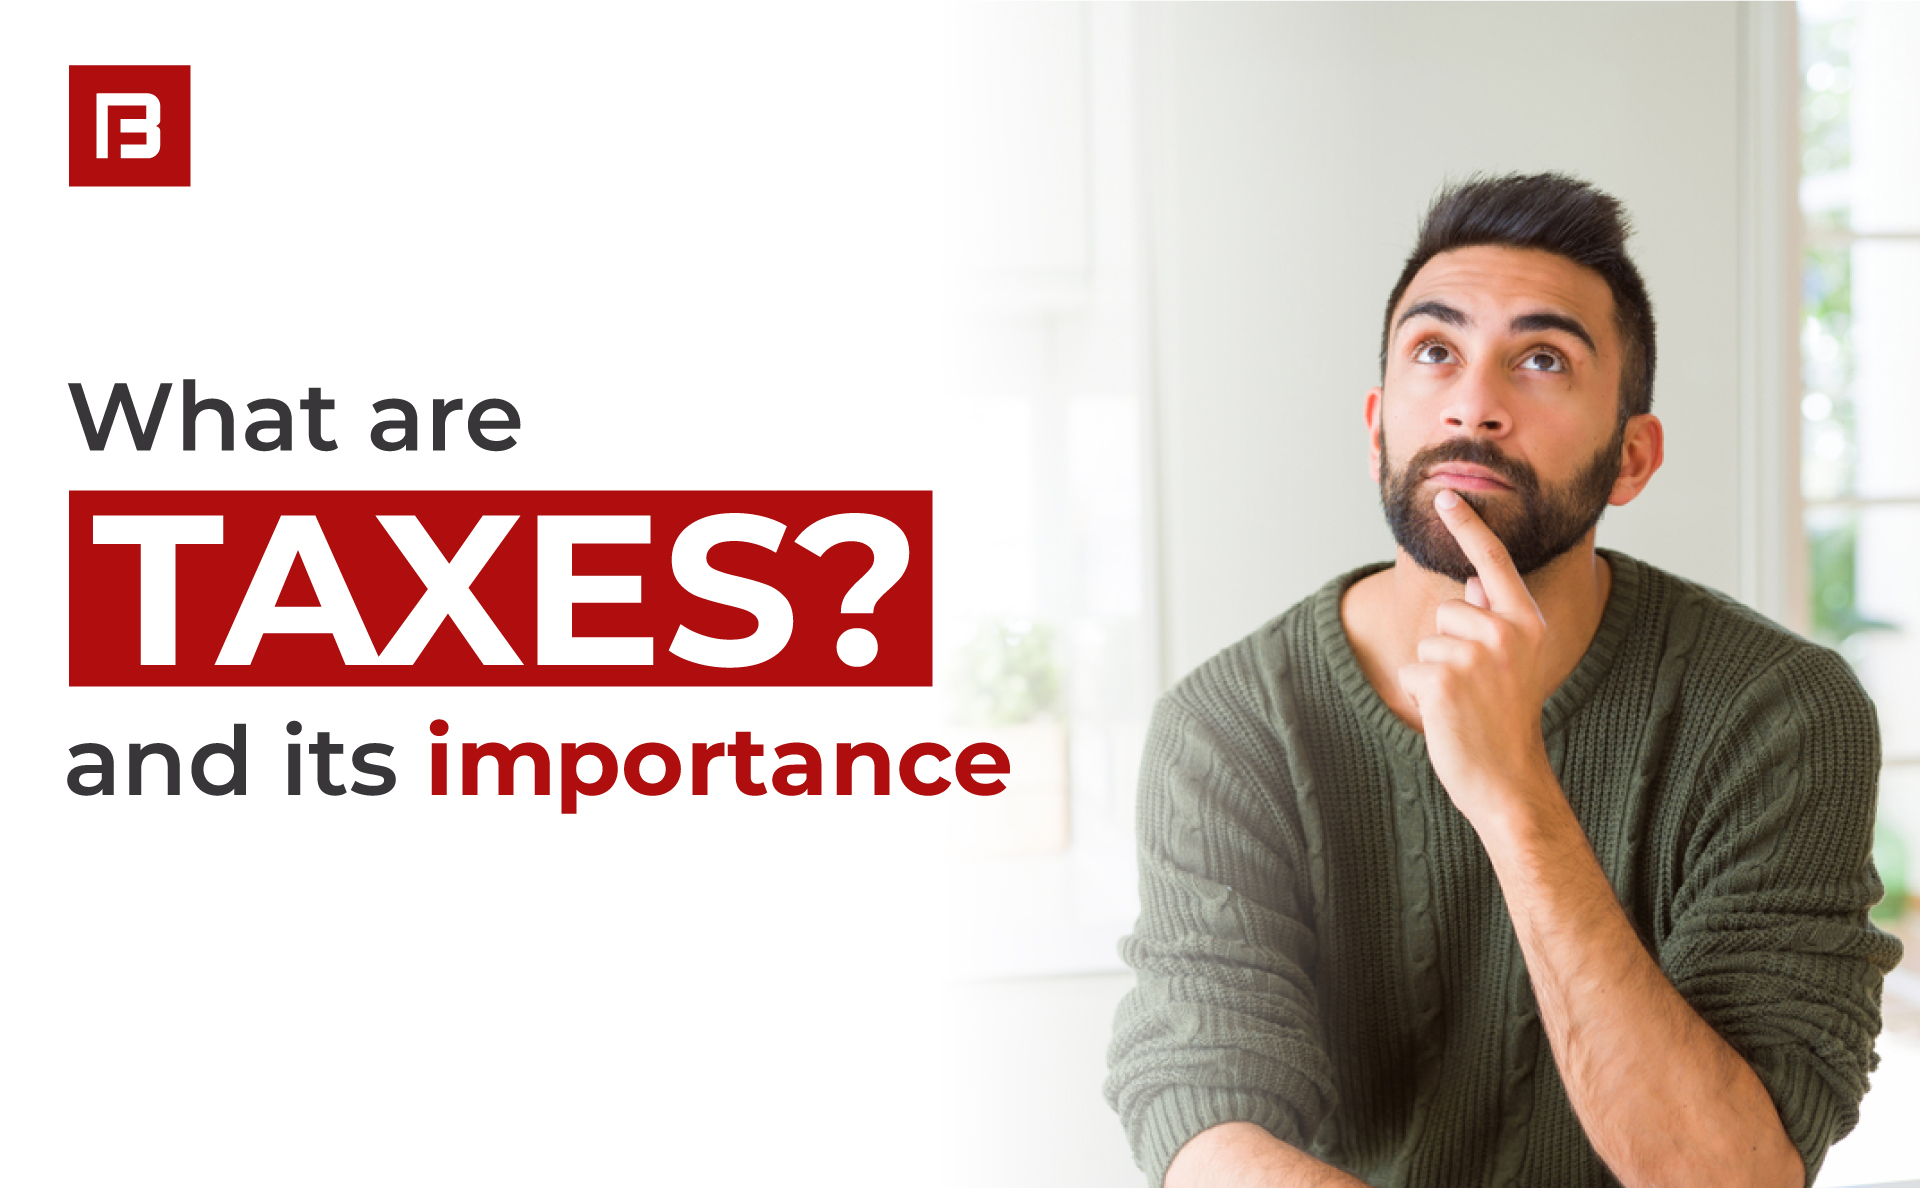 What are taxes? And why are they important for the economy?